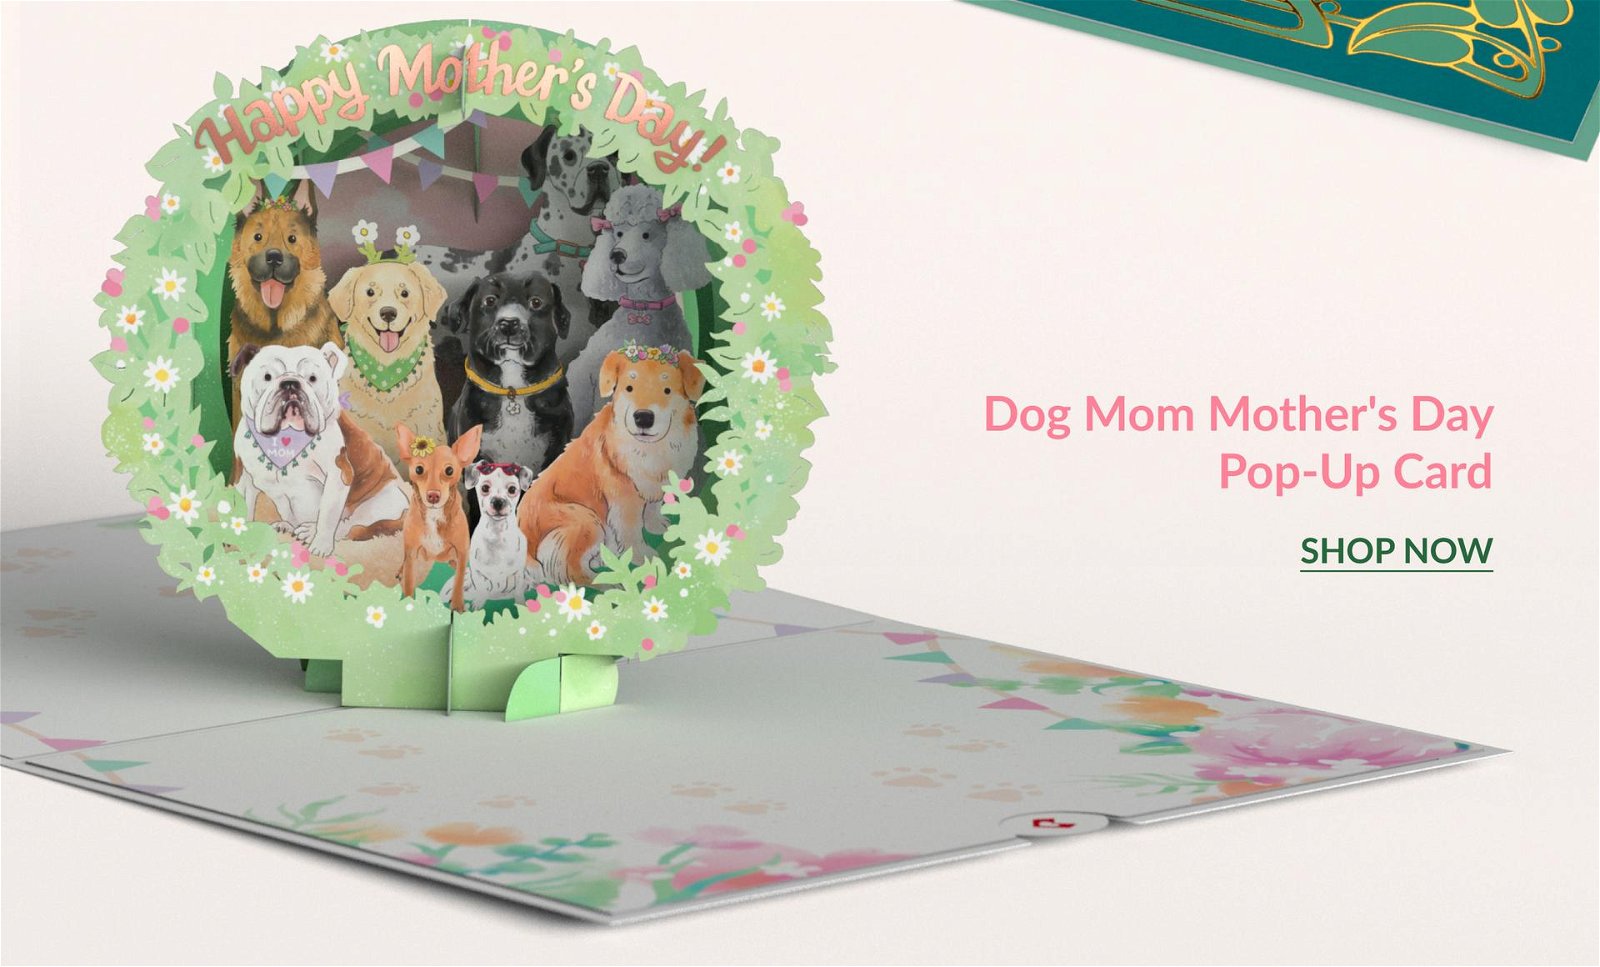 Dog Mom Mother’s Day Pop-Up Card | SHOP NOW